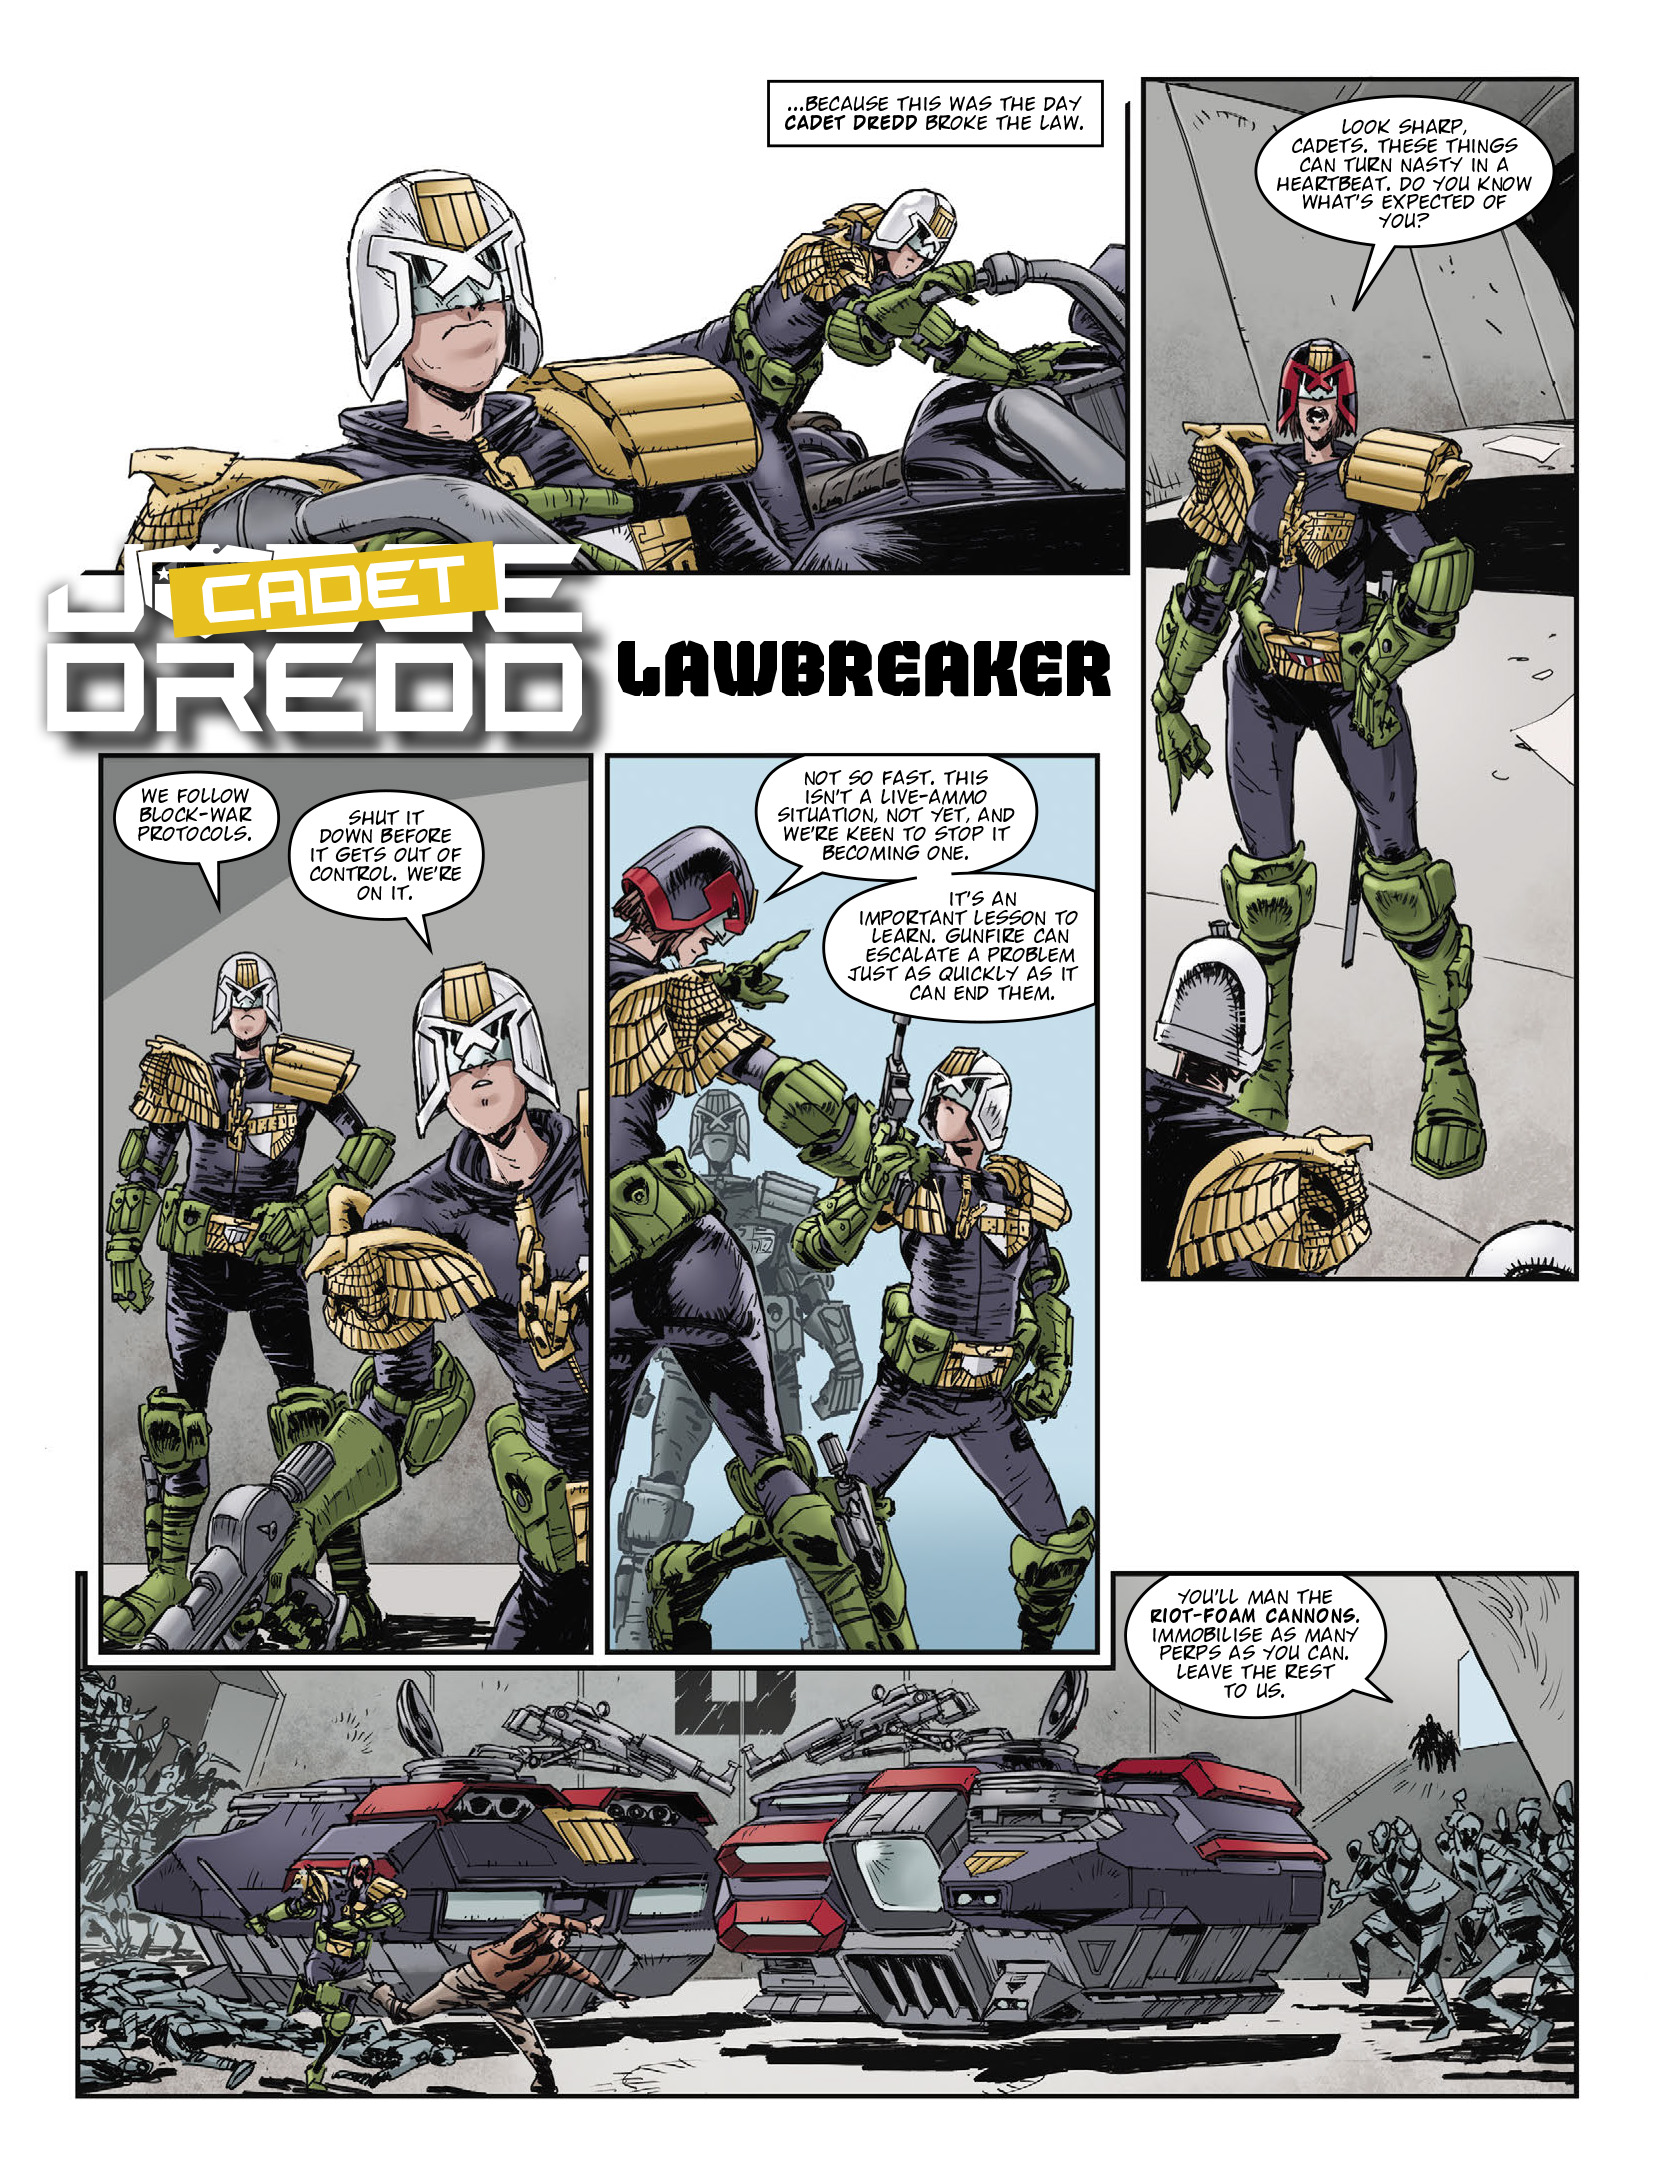 2000 AD: Chapter 2233 - Page 4